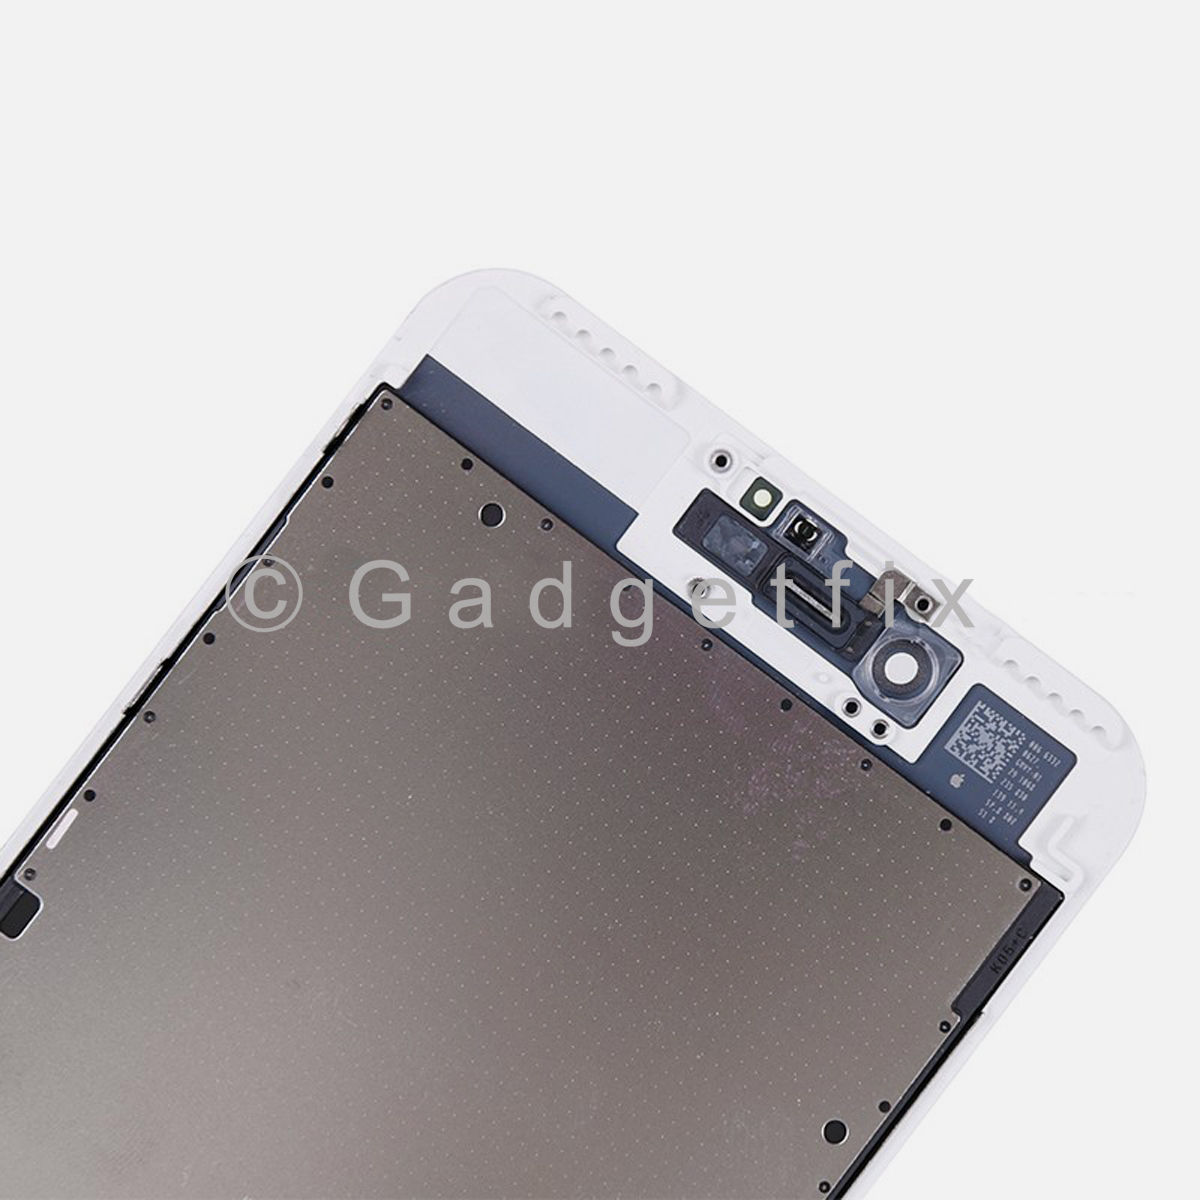 White LCD Display Screen Digitizer Assembly + Steel Plate For iPhone 7 Plus 